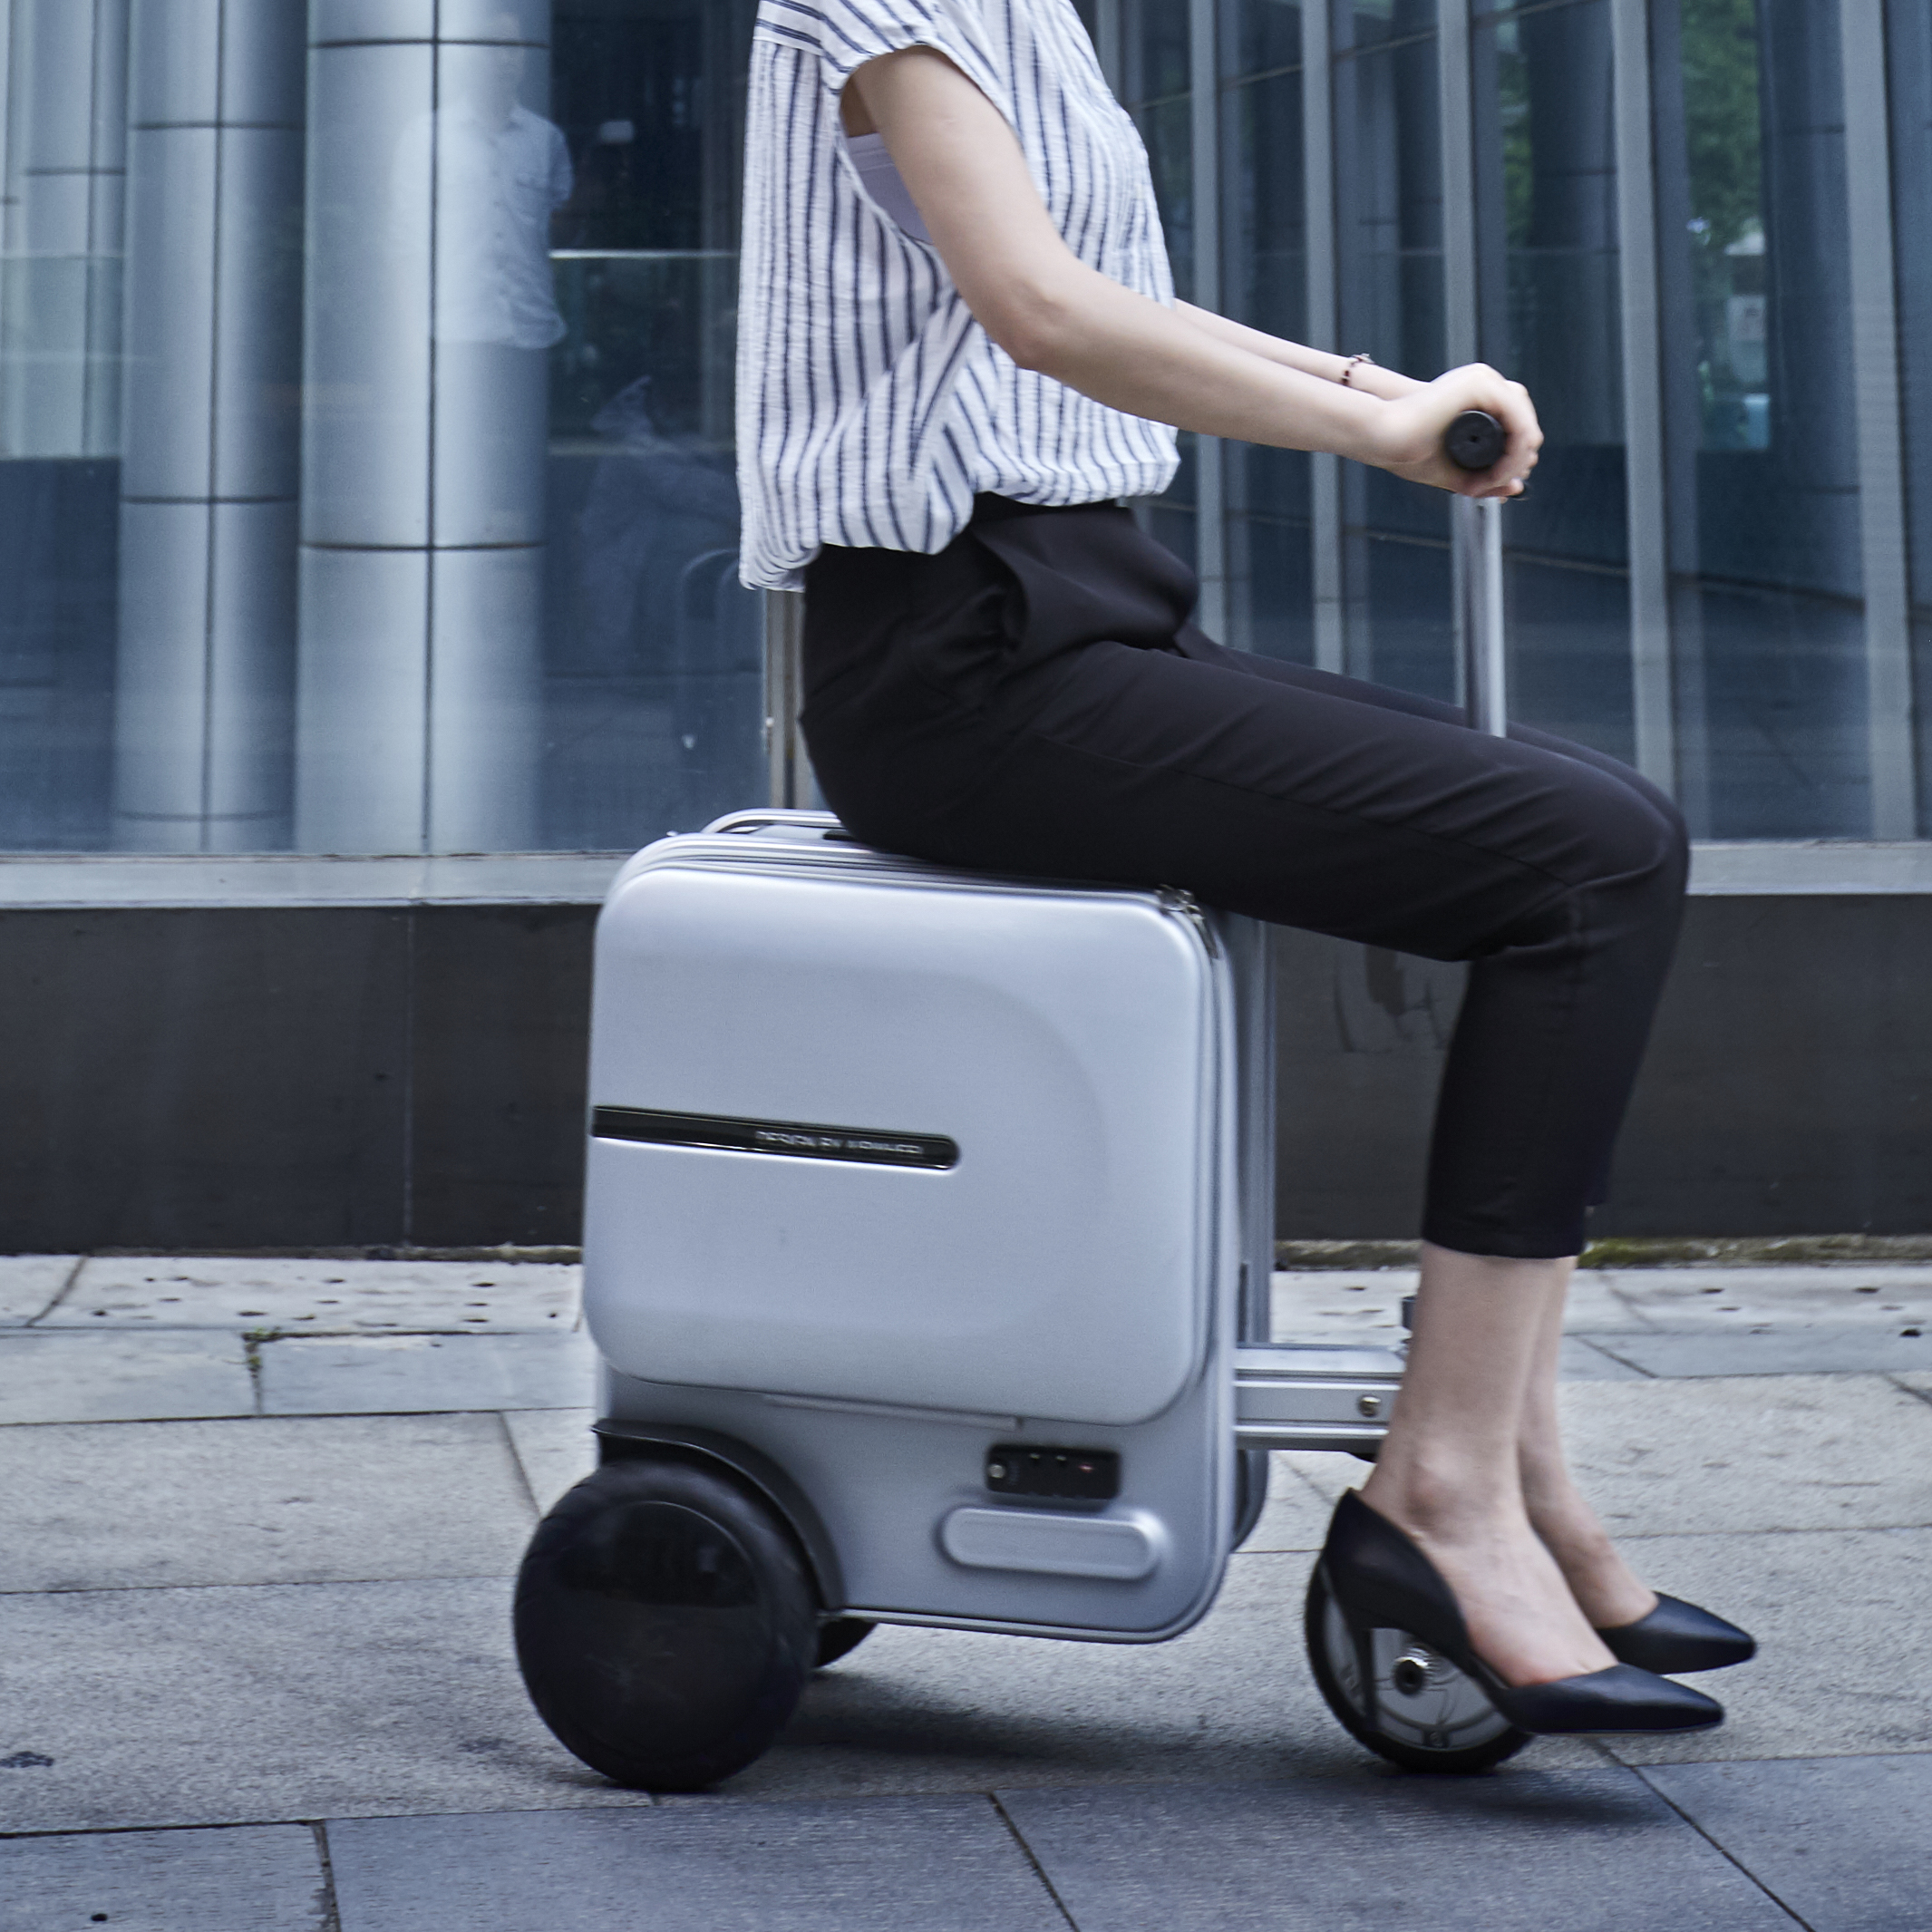 Airwheel SE3 suitcase electric scooter